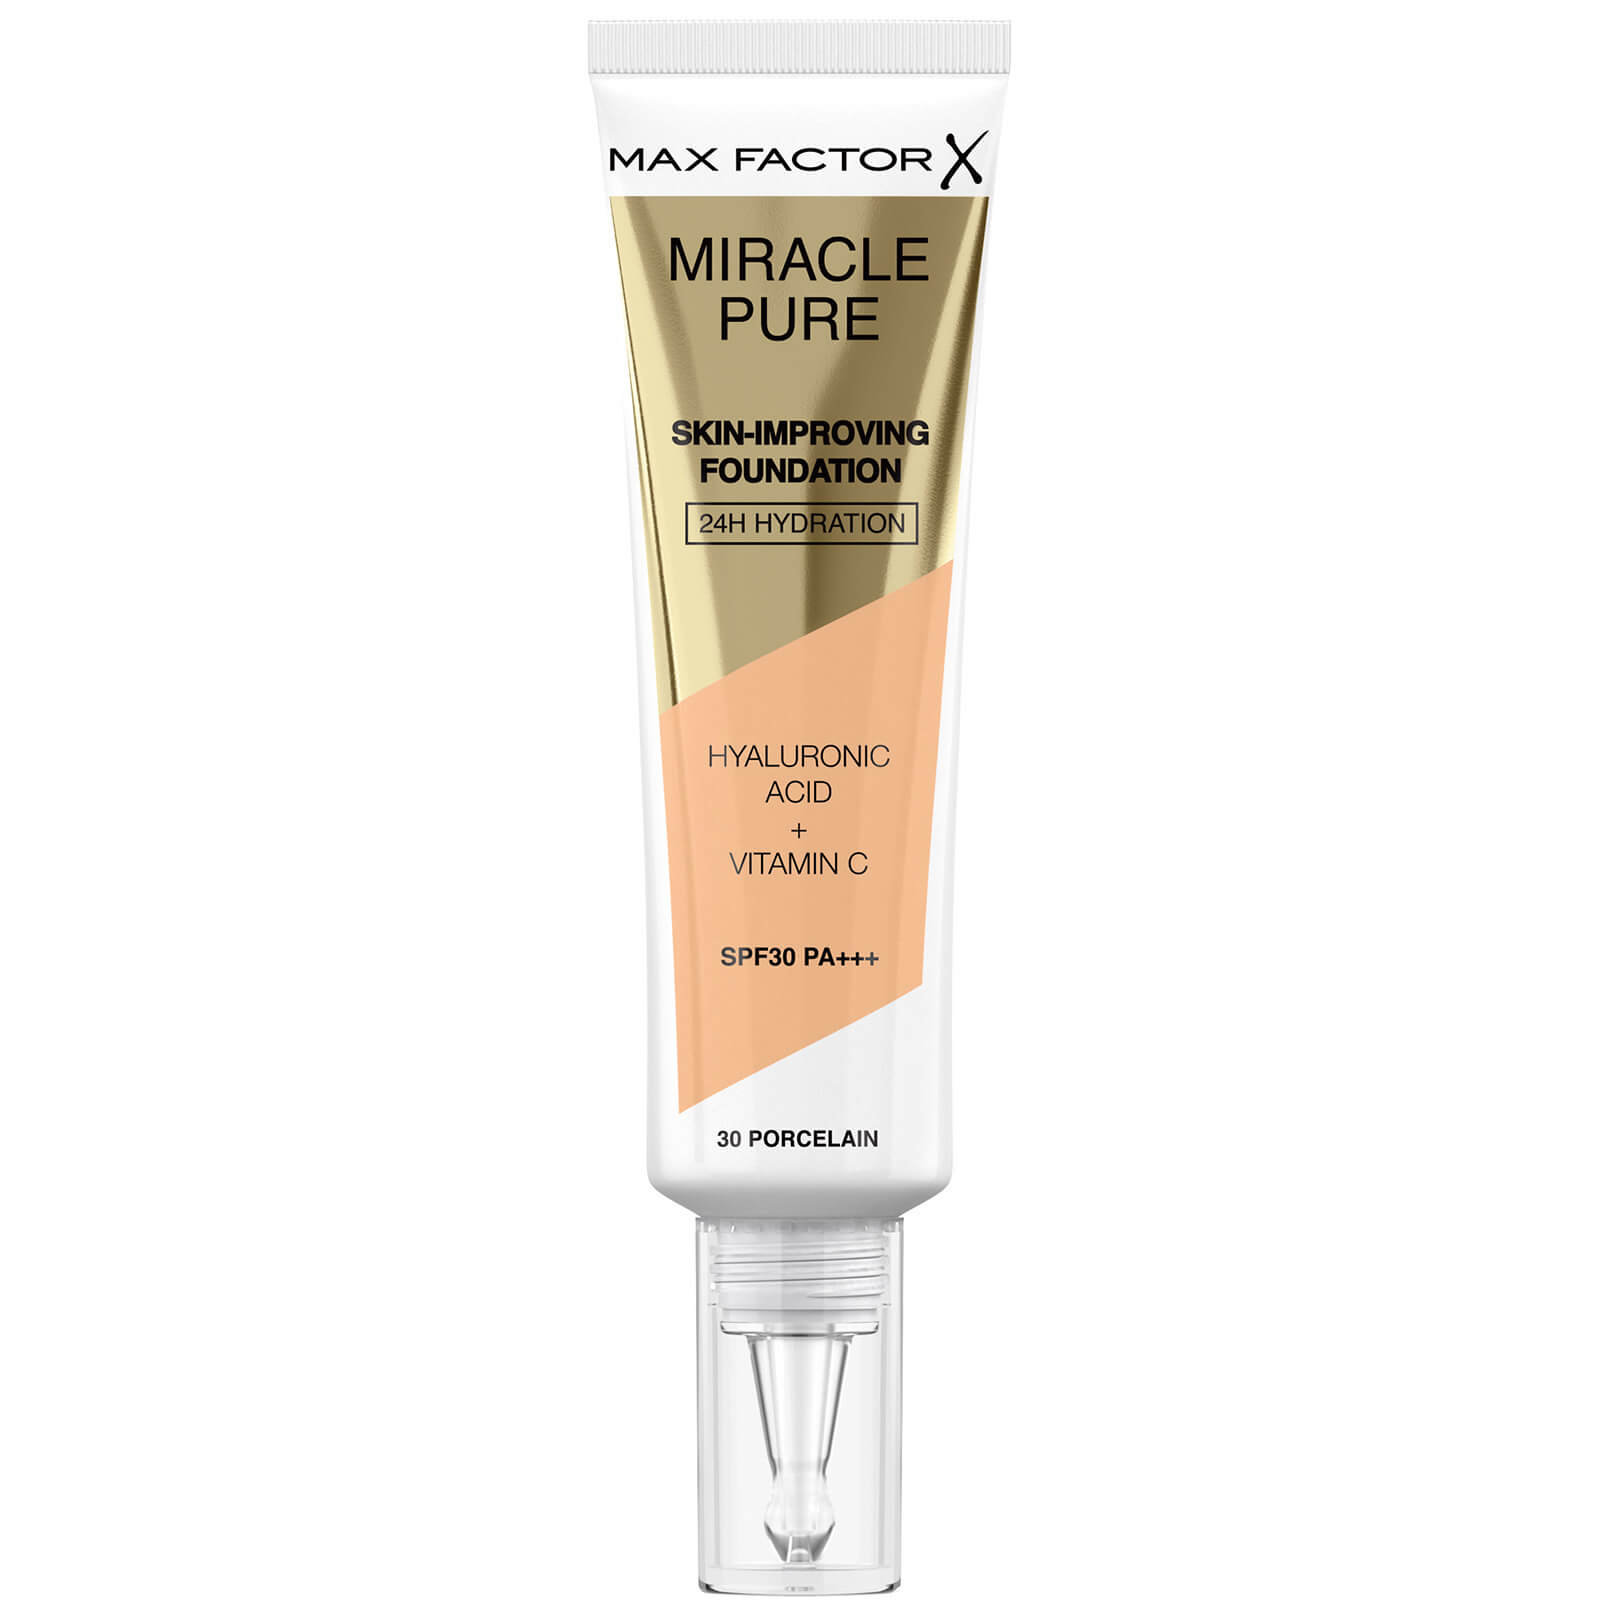 Max Factor Miracle Pure Skin Improving Foundation 30ml (Various Shades) - Porcelain